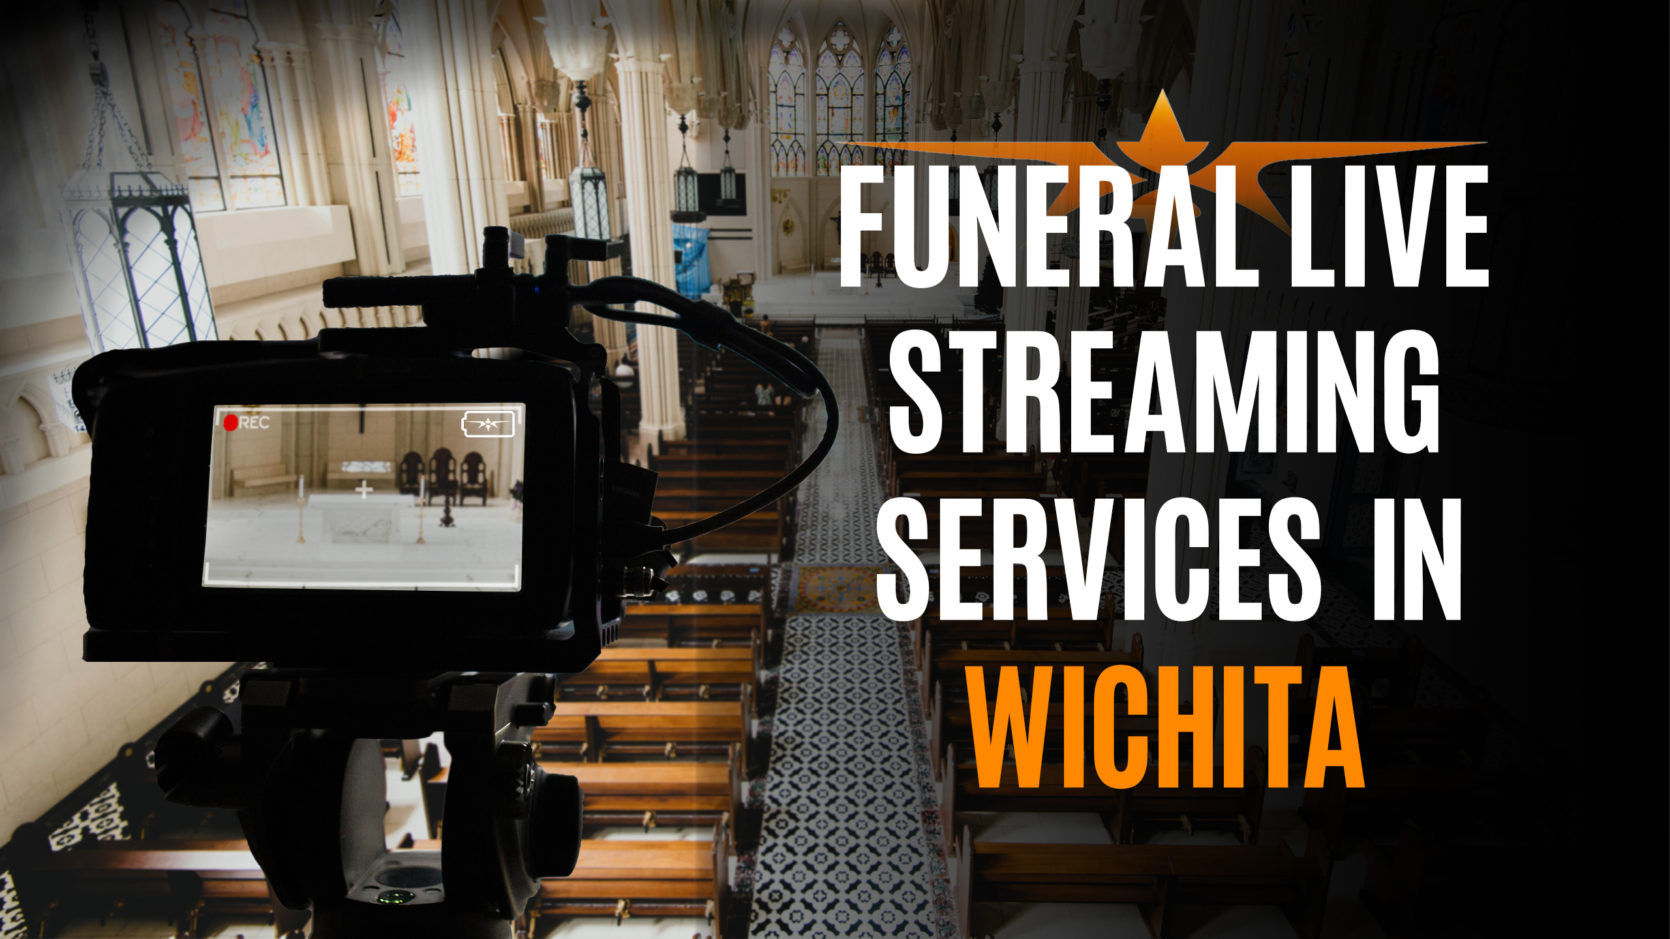 Funeral Live Streaming Services in Wichita